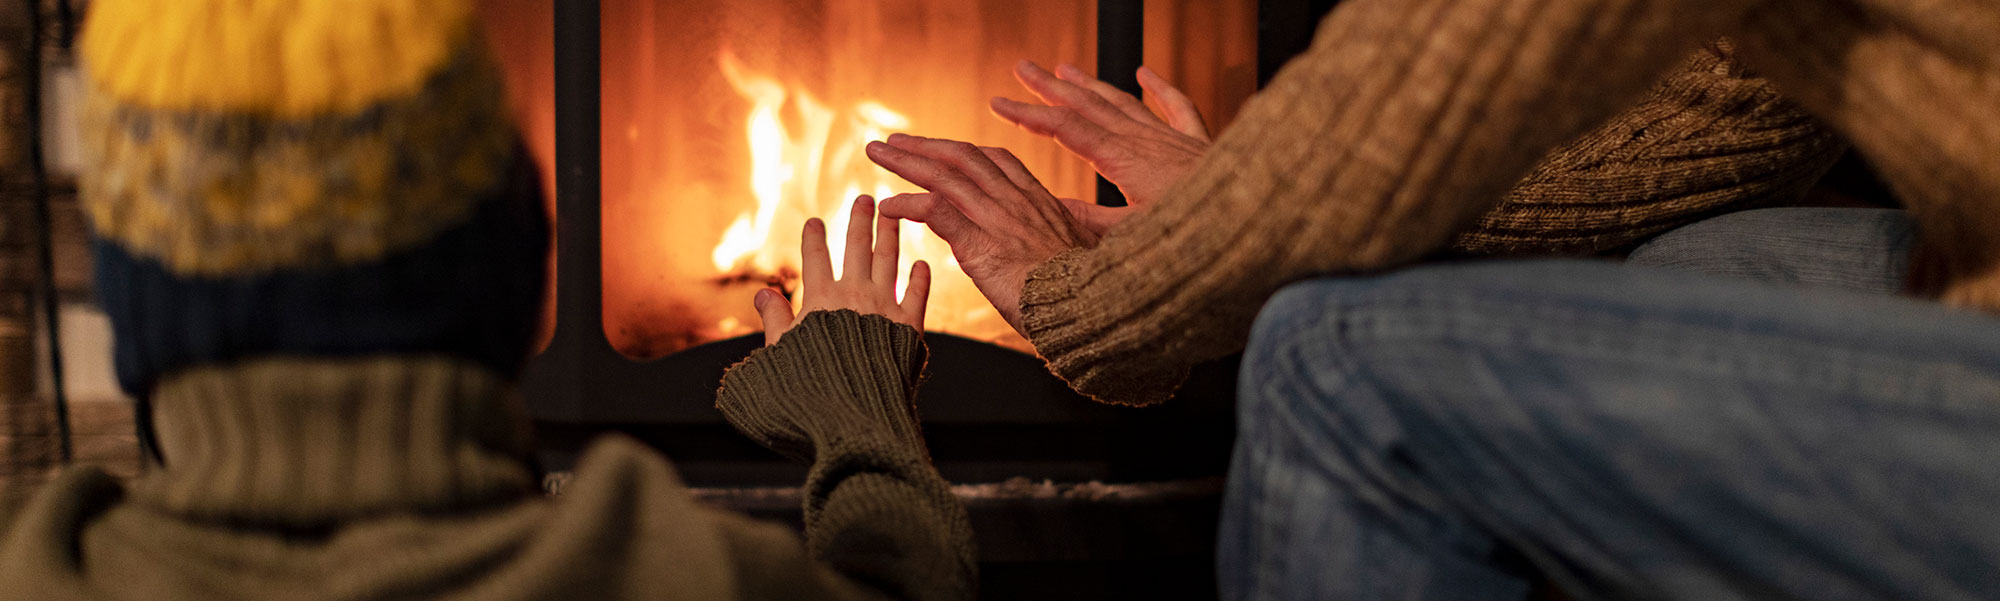 Two people warming their hands in front of a fireplace